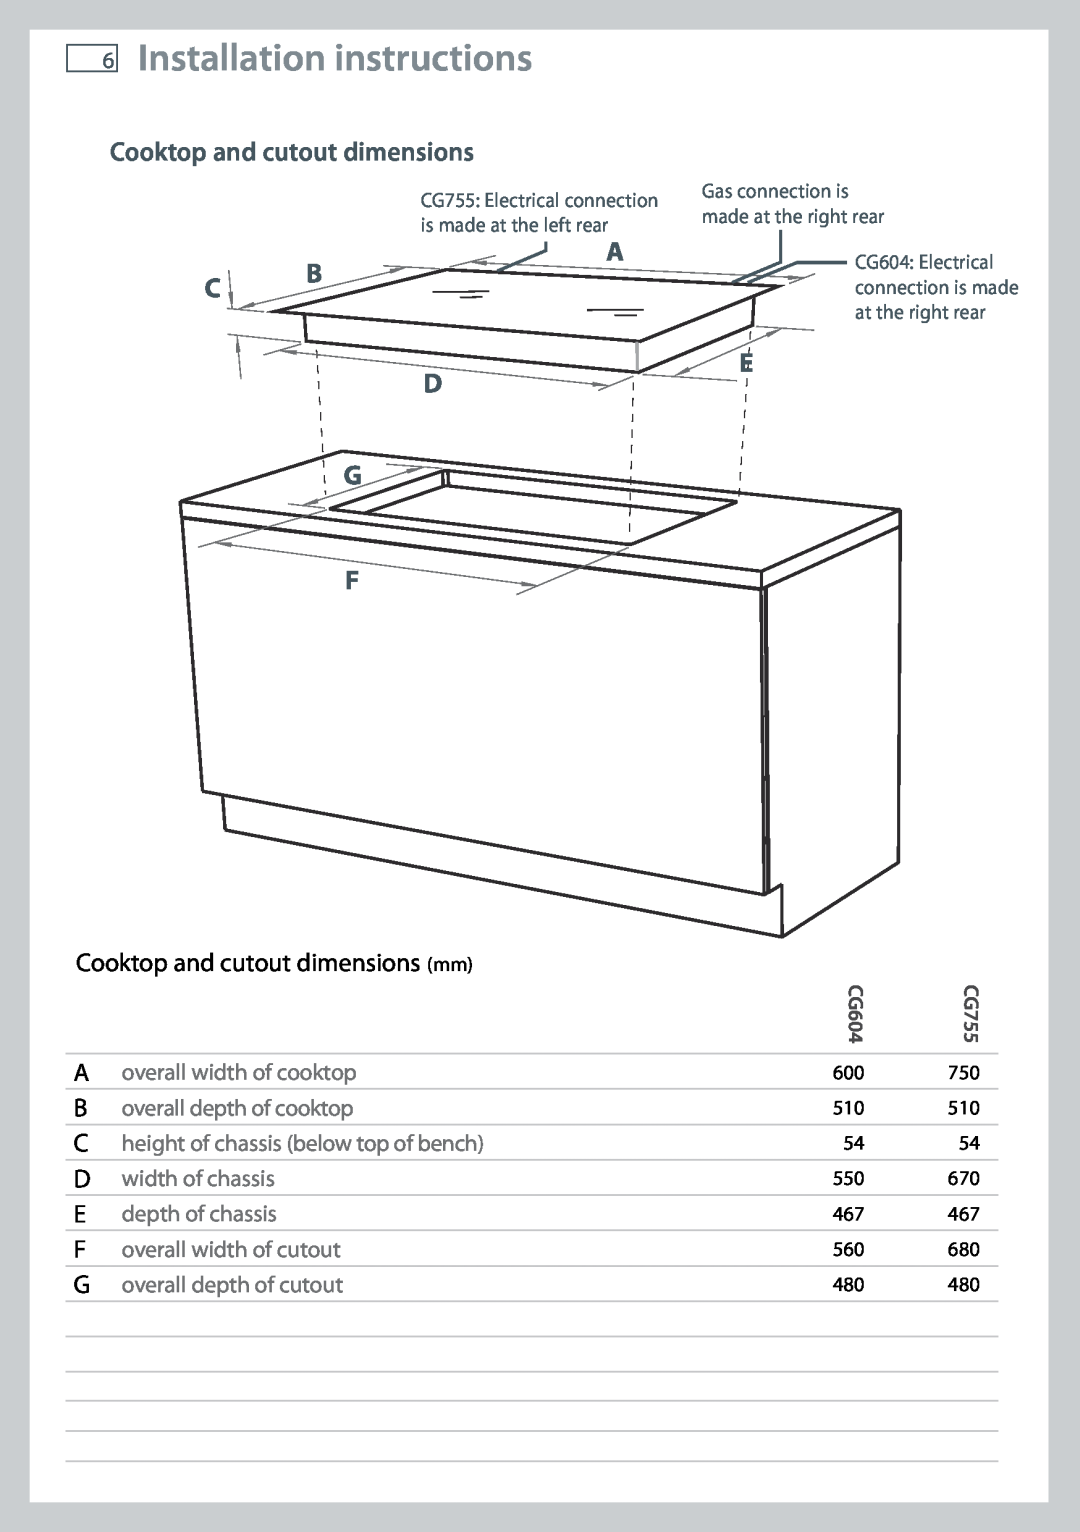 Fisher & Paykel CG755 Installation instructions, Cooktop and cutout dimensions, A C B D G F, overall width of cooktop 